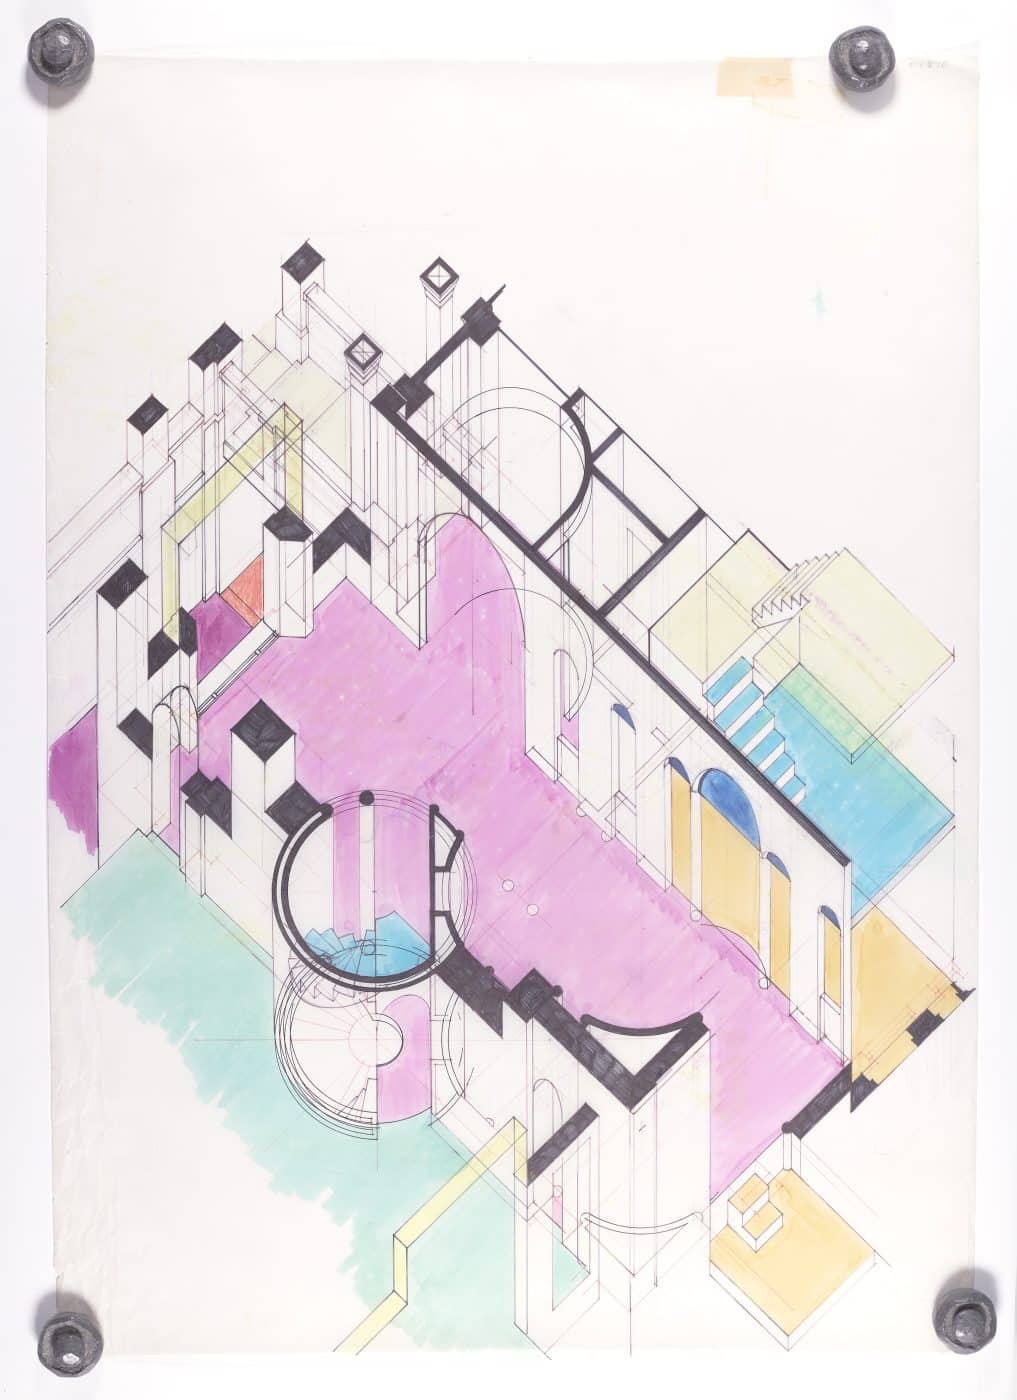 A colorful drawing of Farrell’s depicting the house’s ground floor